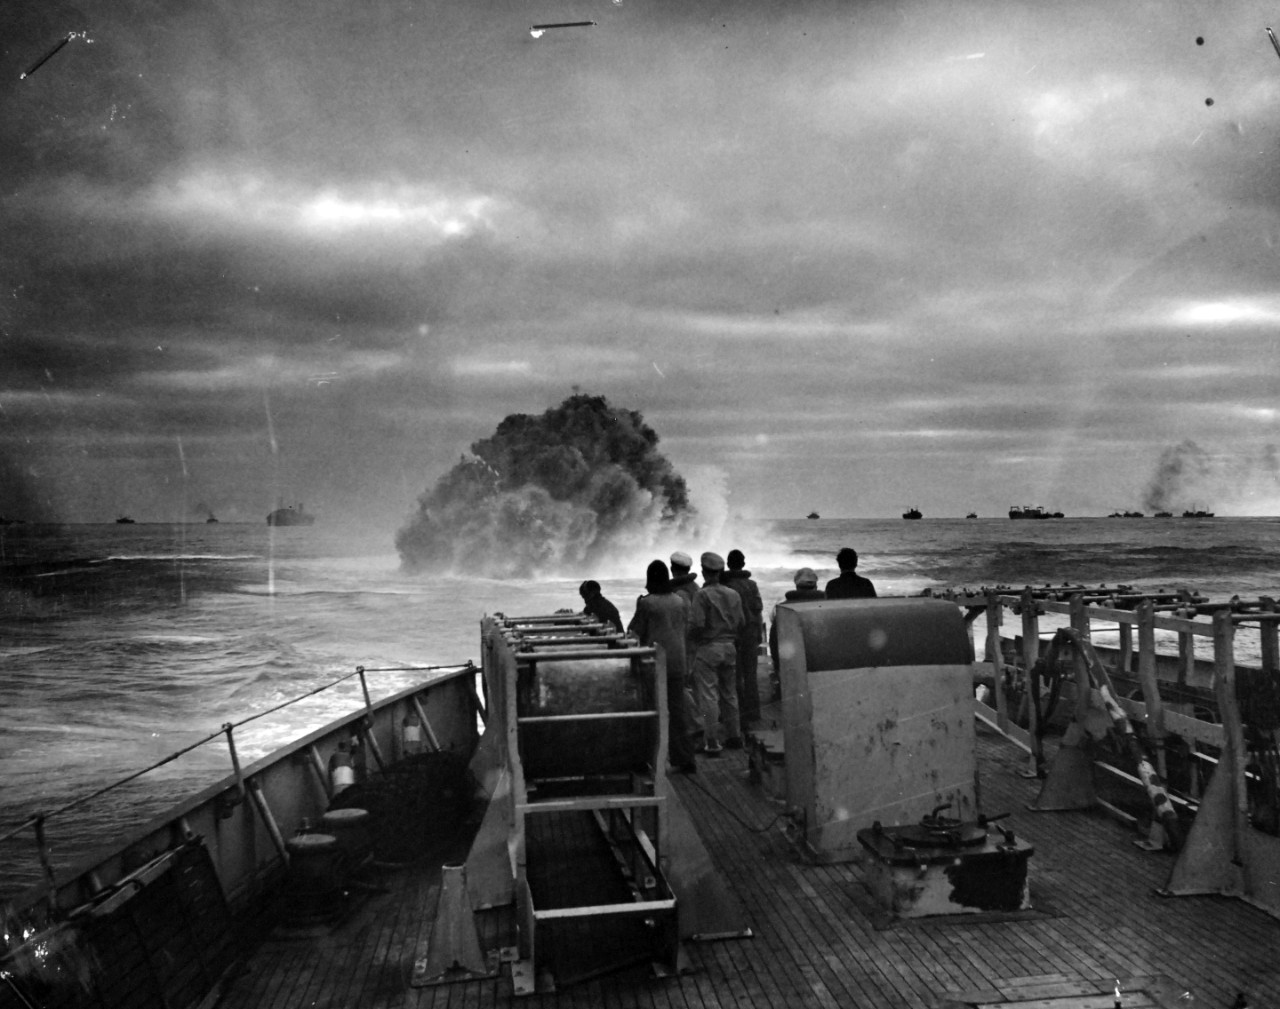 26-G-1517: Sinking of German submarine U-175, April 1943. The submarine was sunk off south-west of Ireland by USCGC Spencer (WPG-36) on April 17, 1943. Official Caption: "COAST GUARD CUTTER SINKS SUB: Coast Guardsmen on the deck of the U.S. Coast...